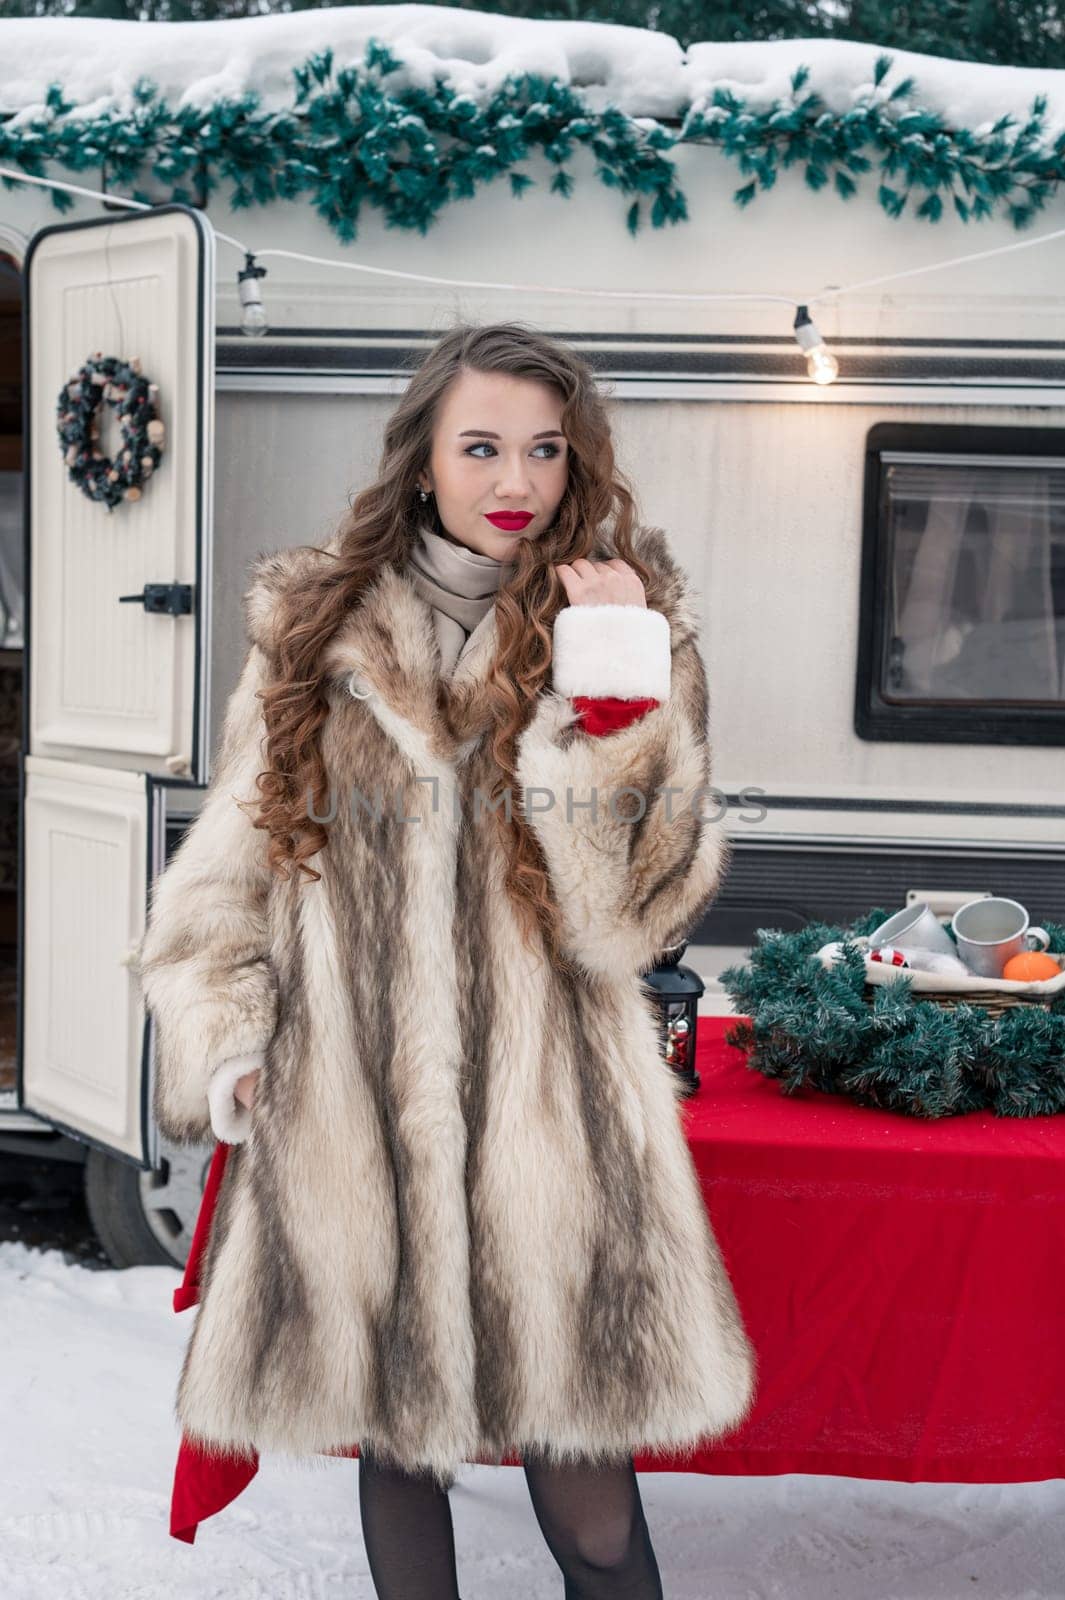 Young woman in fur coat with gift box at winter campsite getting ready for the new year.